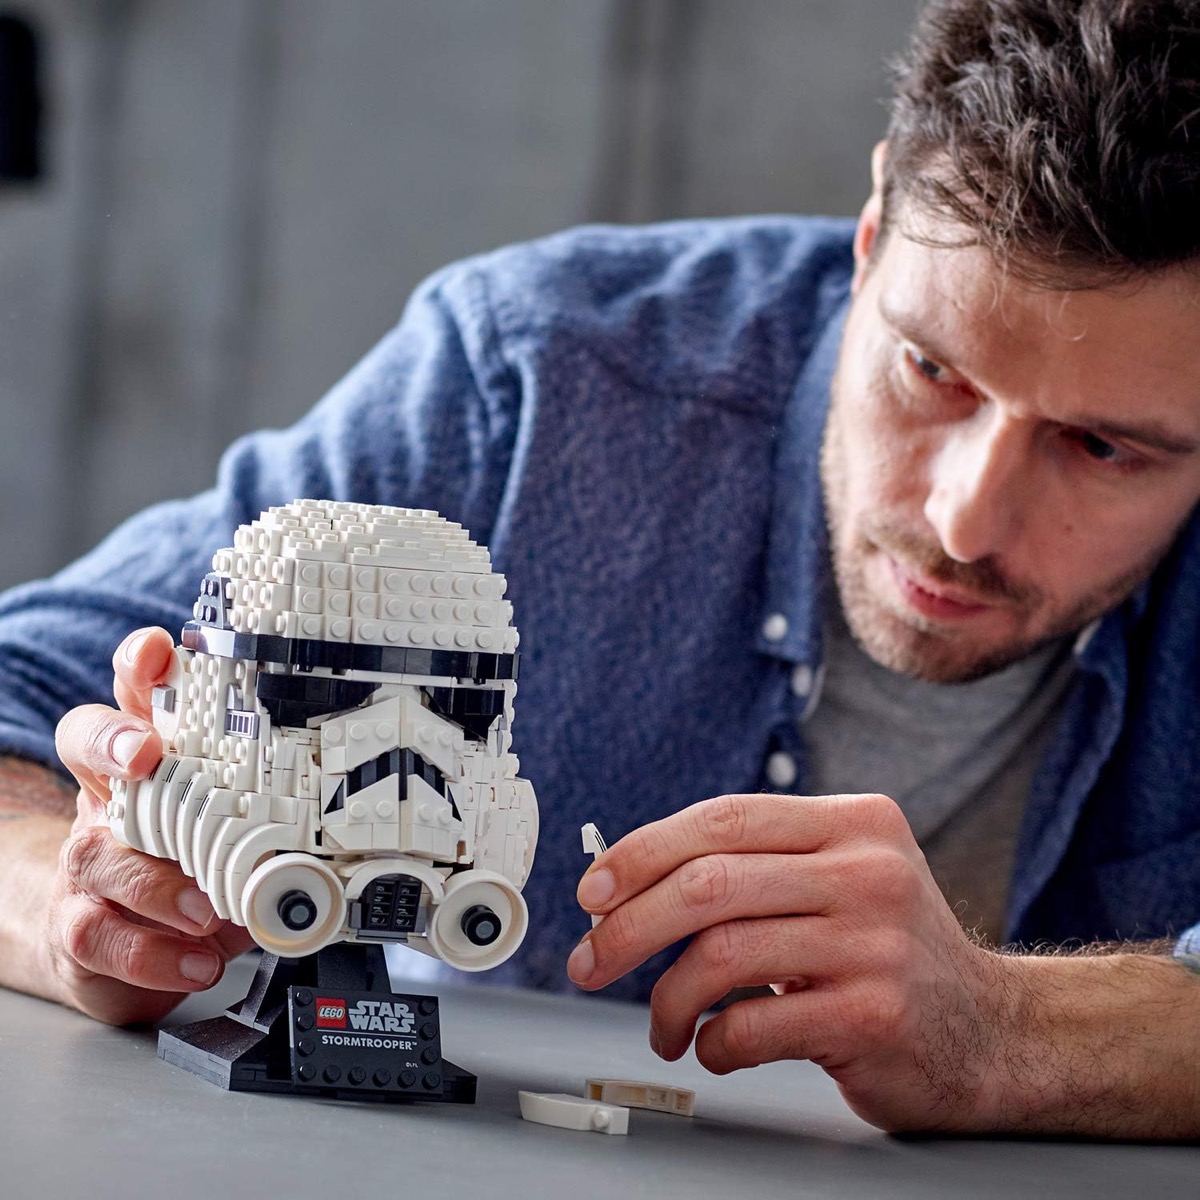 A LEGO version of a Stormtrooper helmet from "Star Wars "